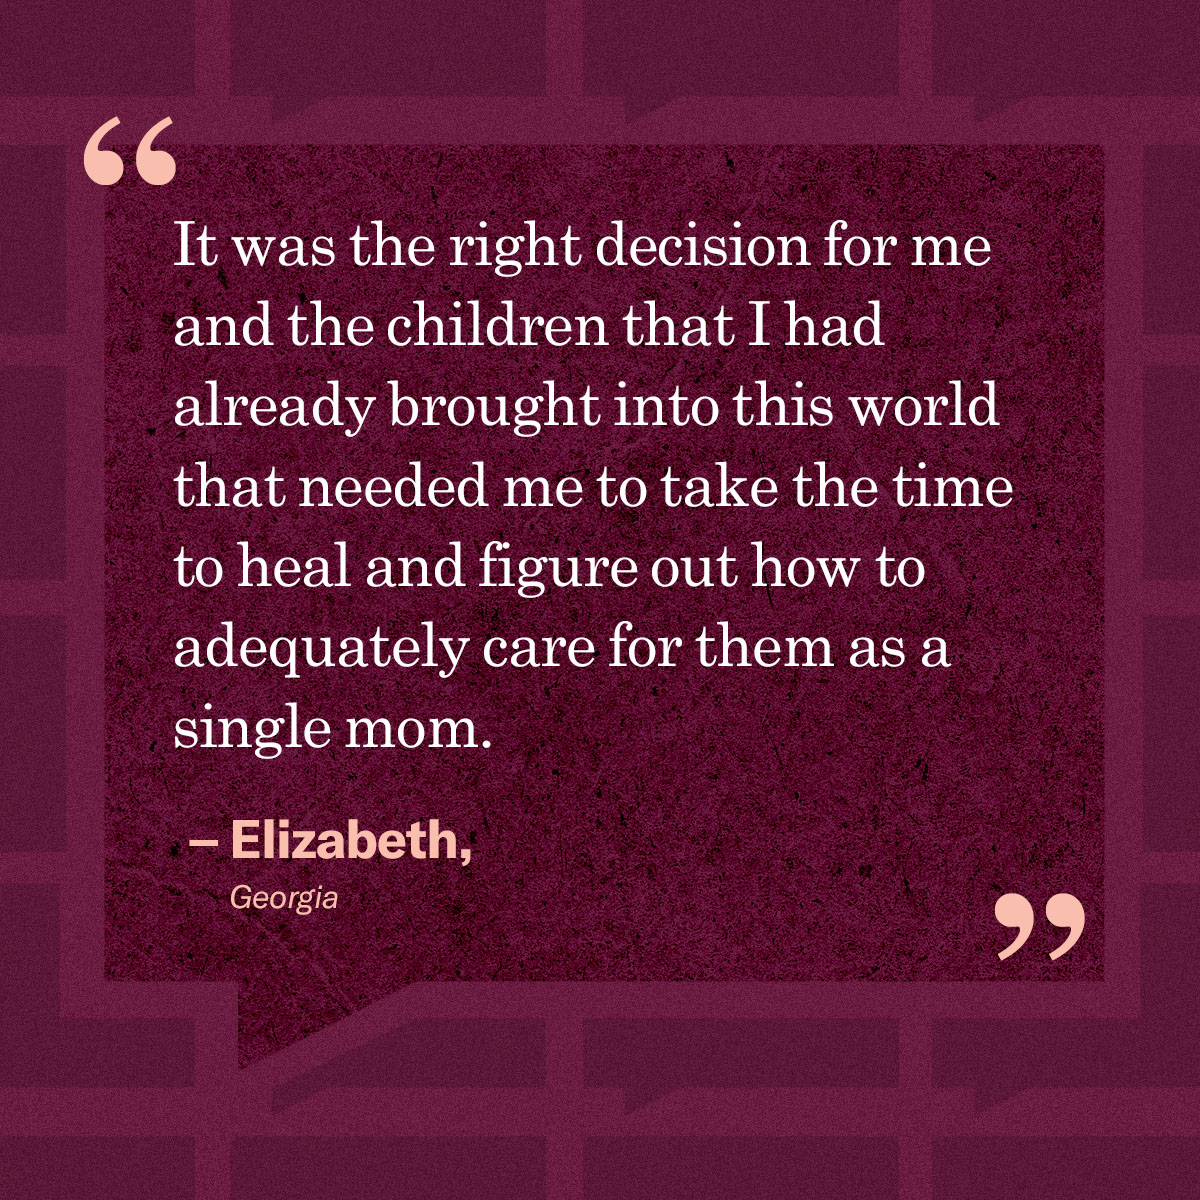 It was the right decision for me and the children that I has already brought into this world that needed me to take the time to heal and figure out how to adequately care for them as a single mom.” — Elizabeth, Georgia